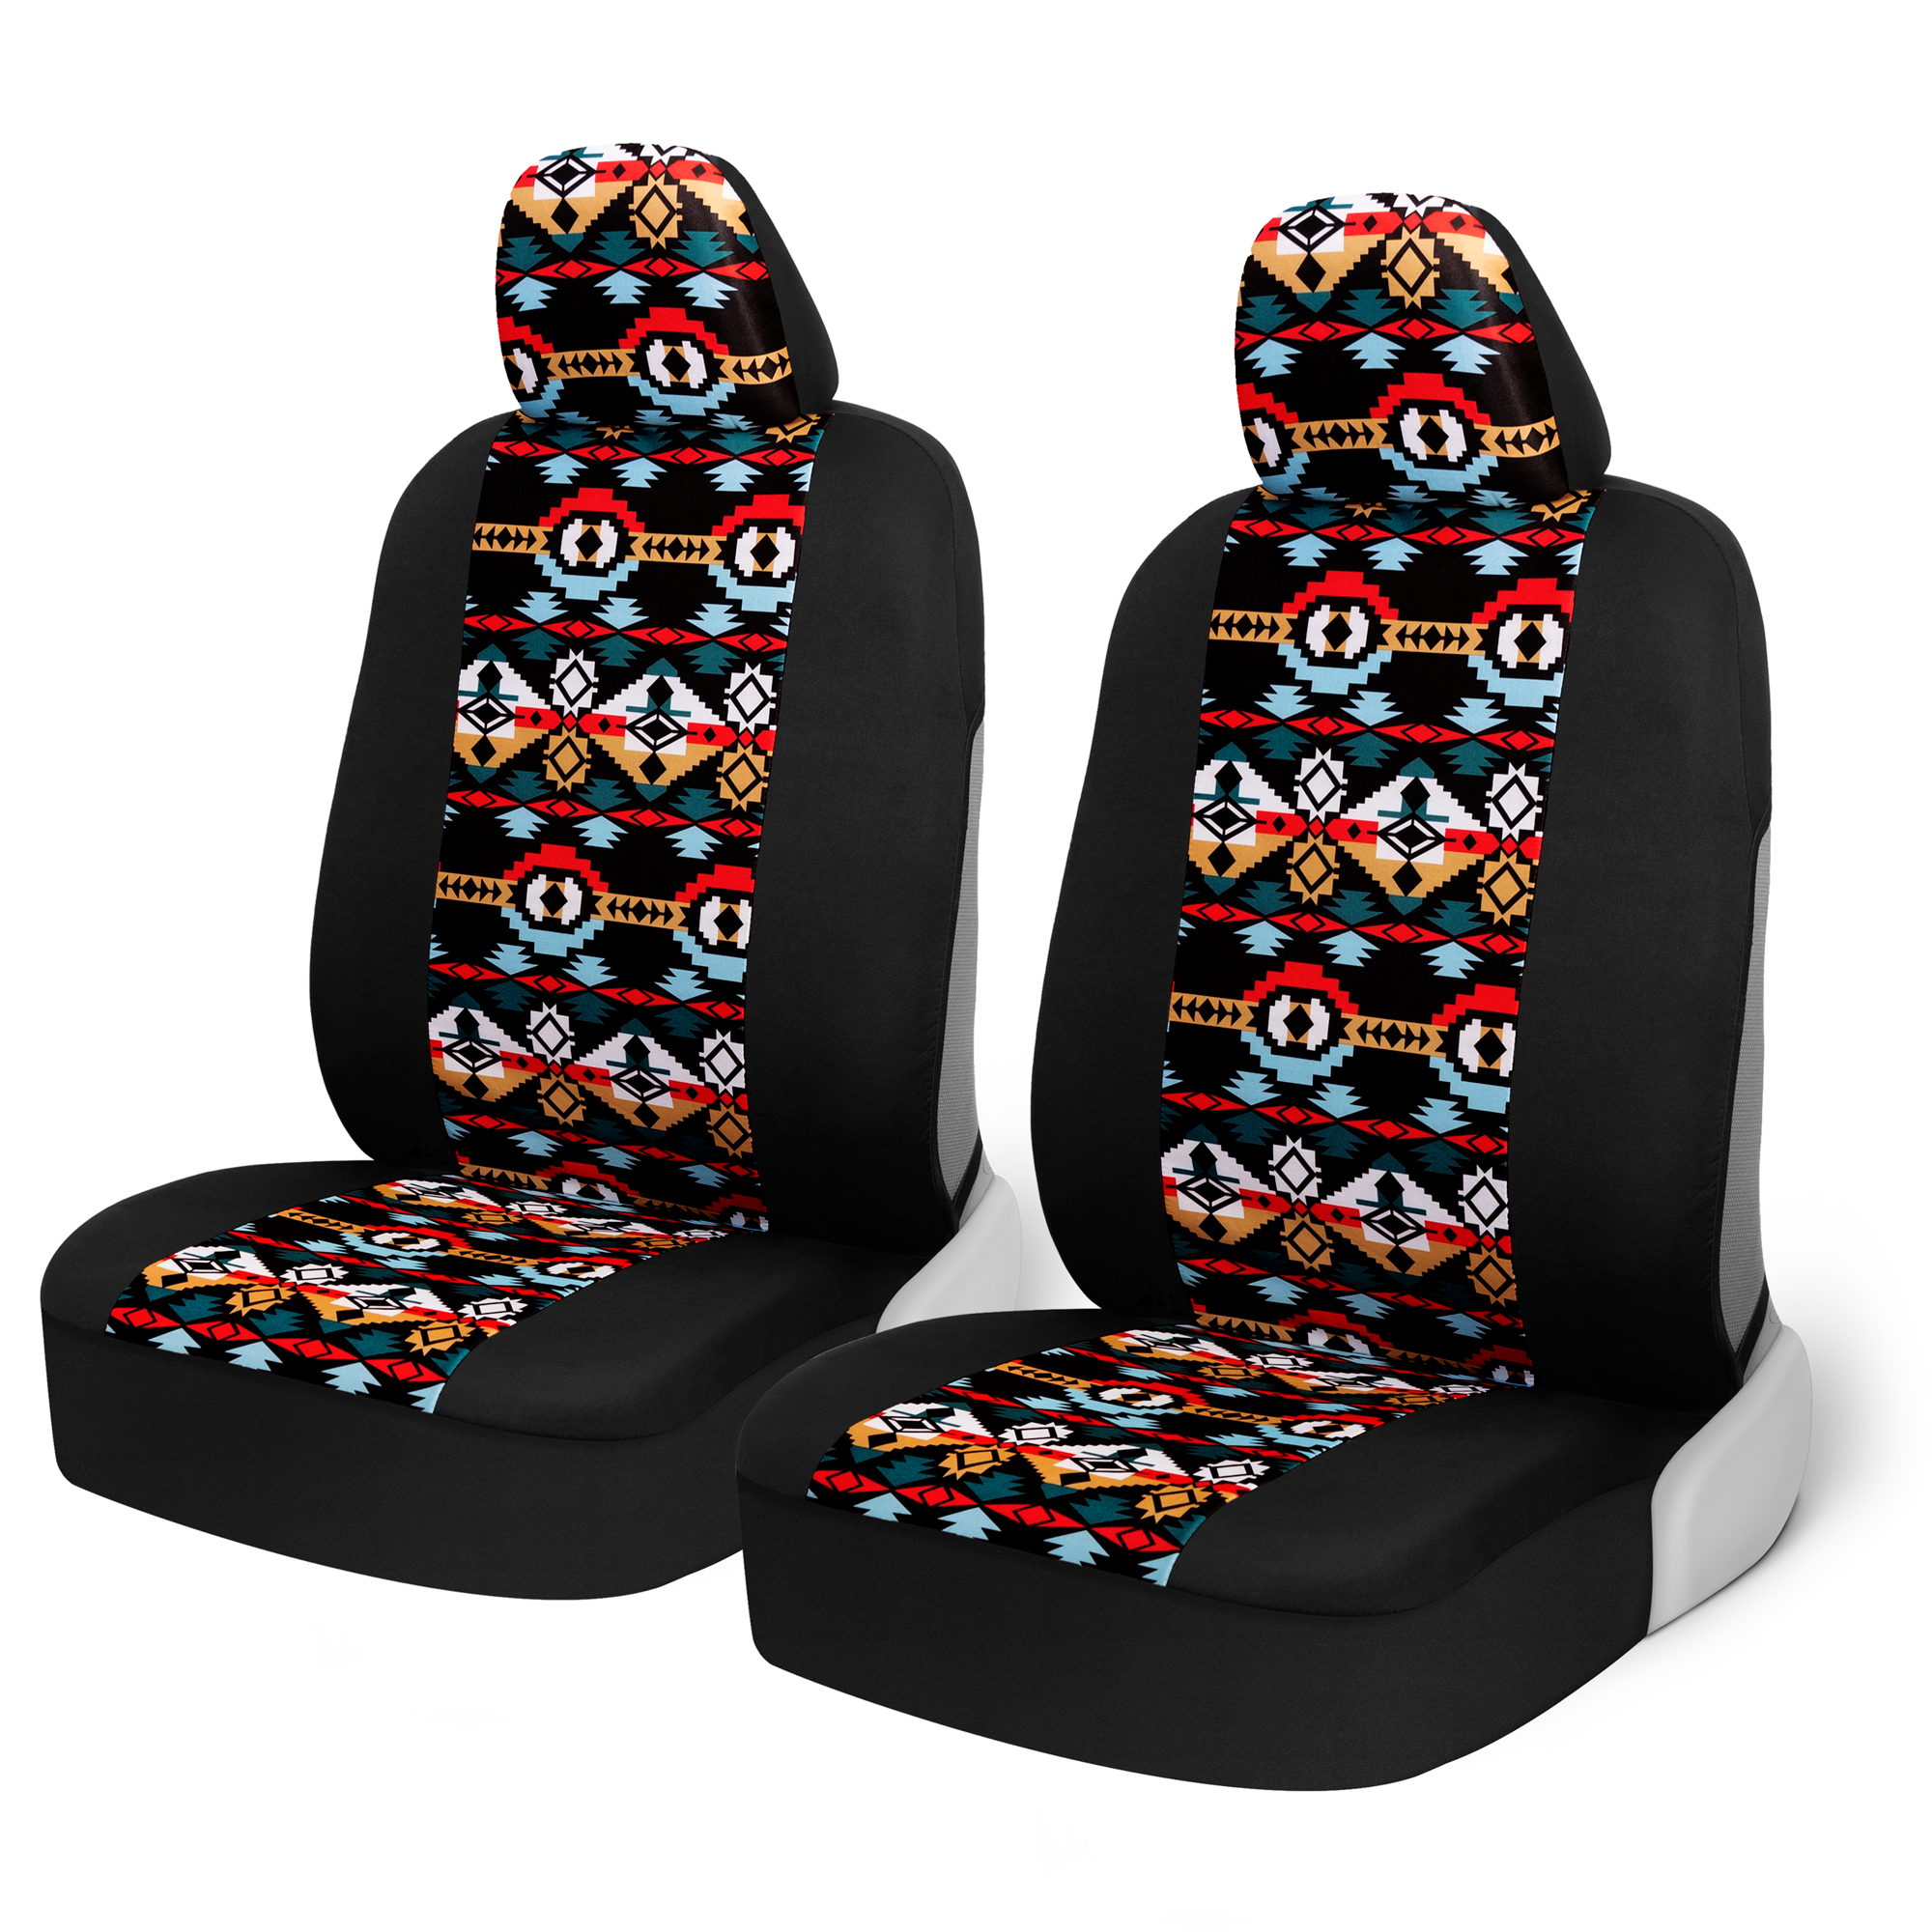 BDK Blue Aztec Car Seat Covers for Front Seats, 2 Pack – Geometric Print Front Seat Cover Set with Matching Headrest, Sideless Design for Easy Installation, Universal Fit for Car Truck Van and SUV